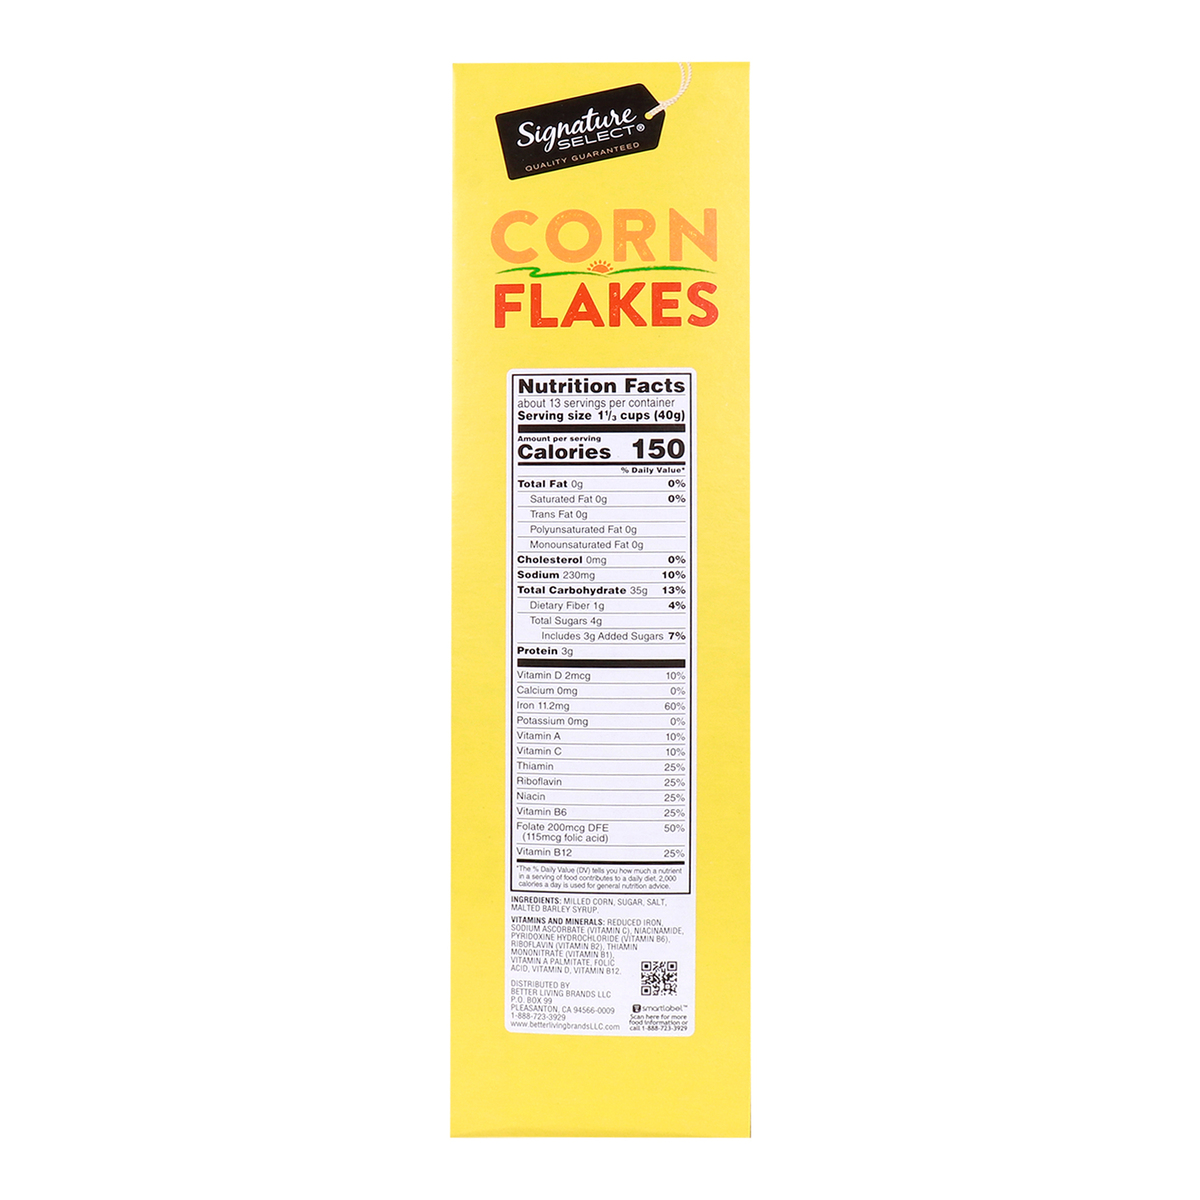 Signature Select Toasted Flakes Of Corn Cereal 510g